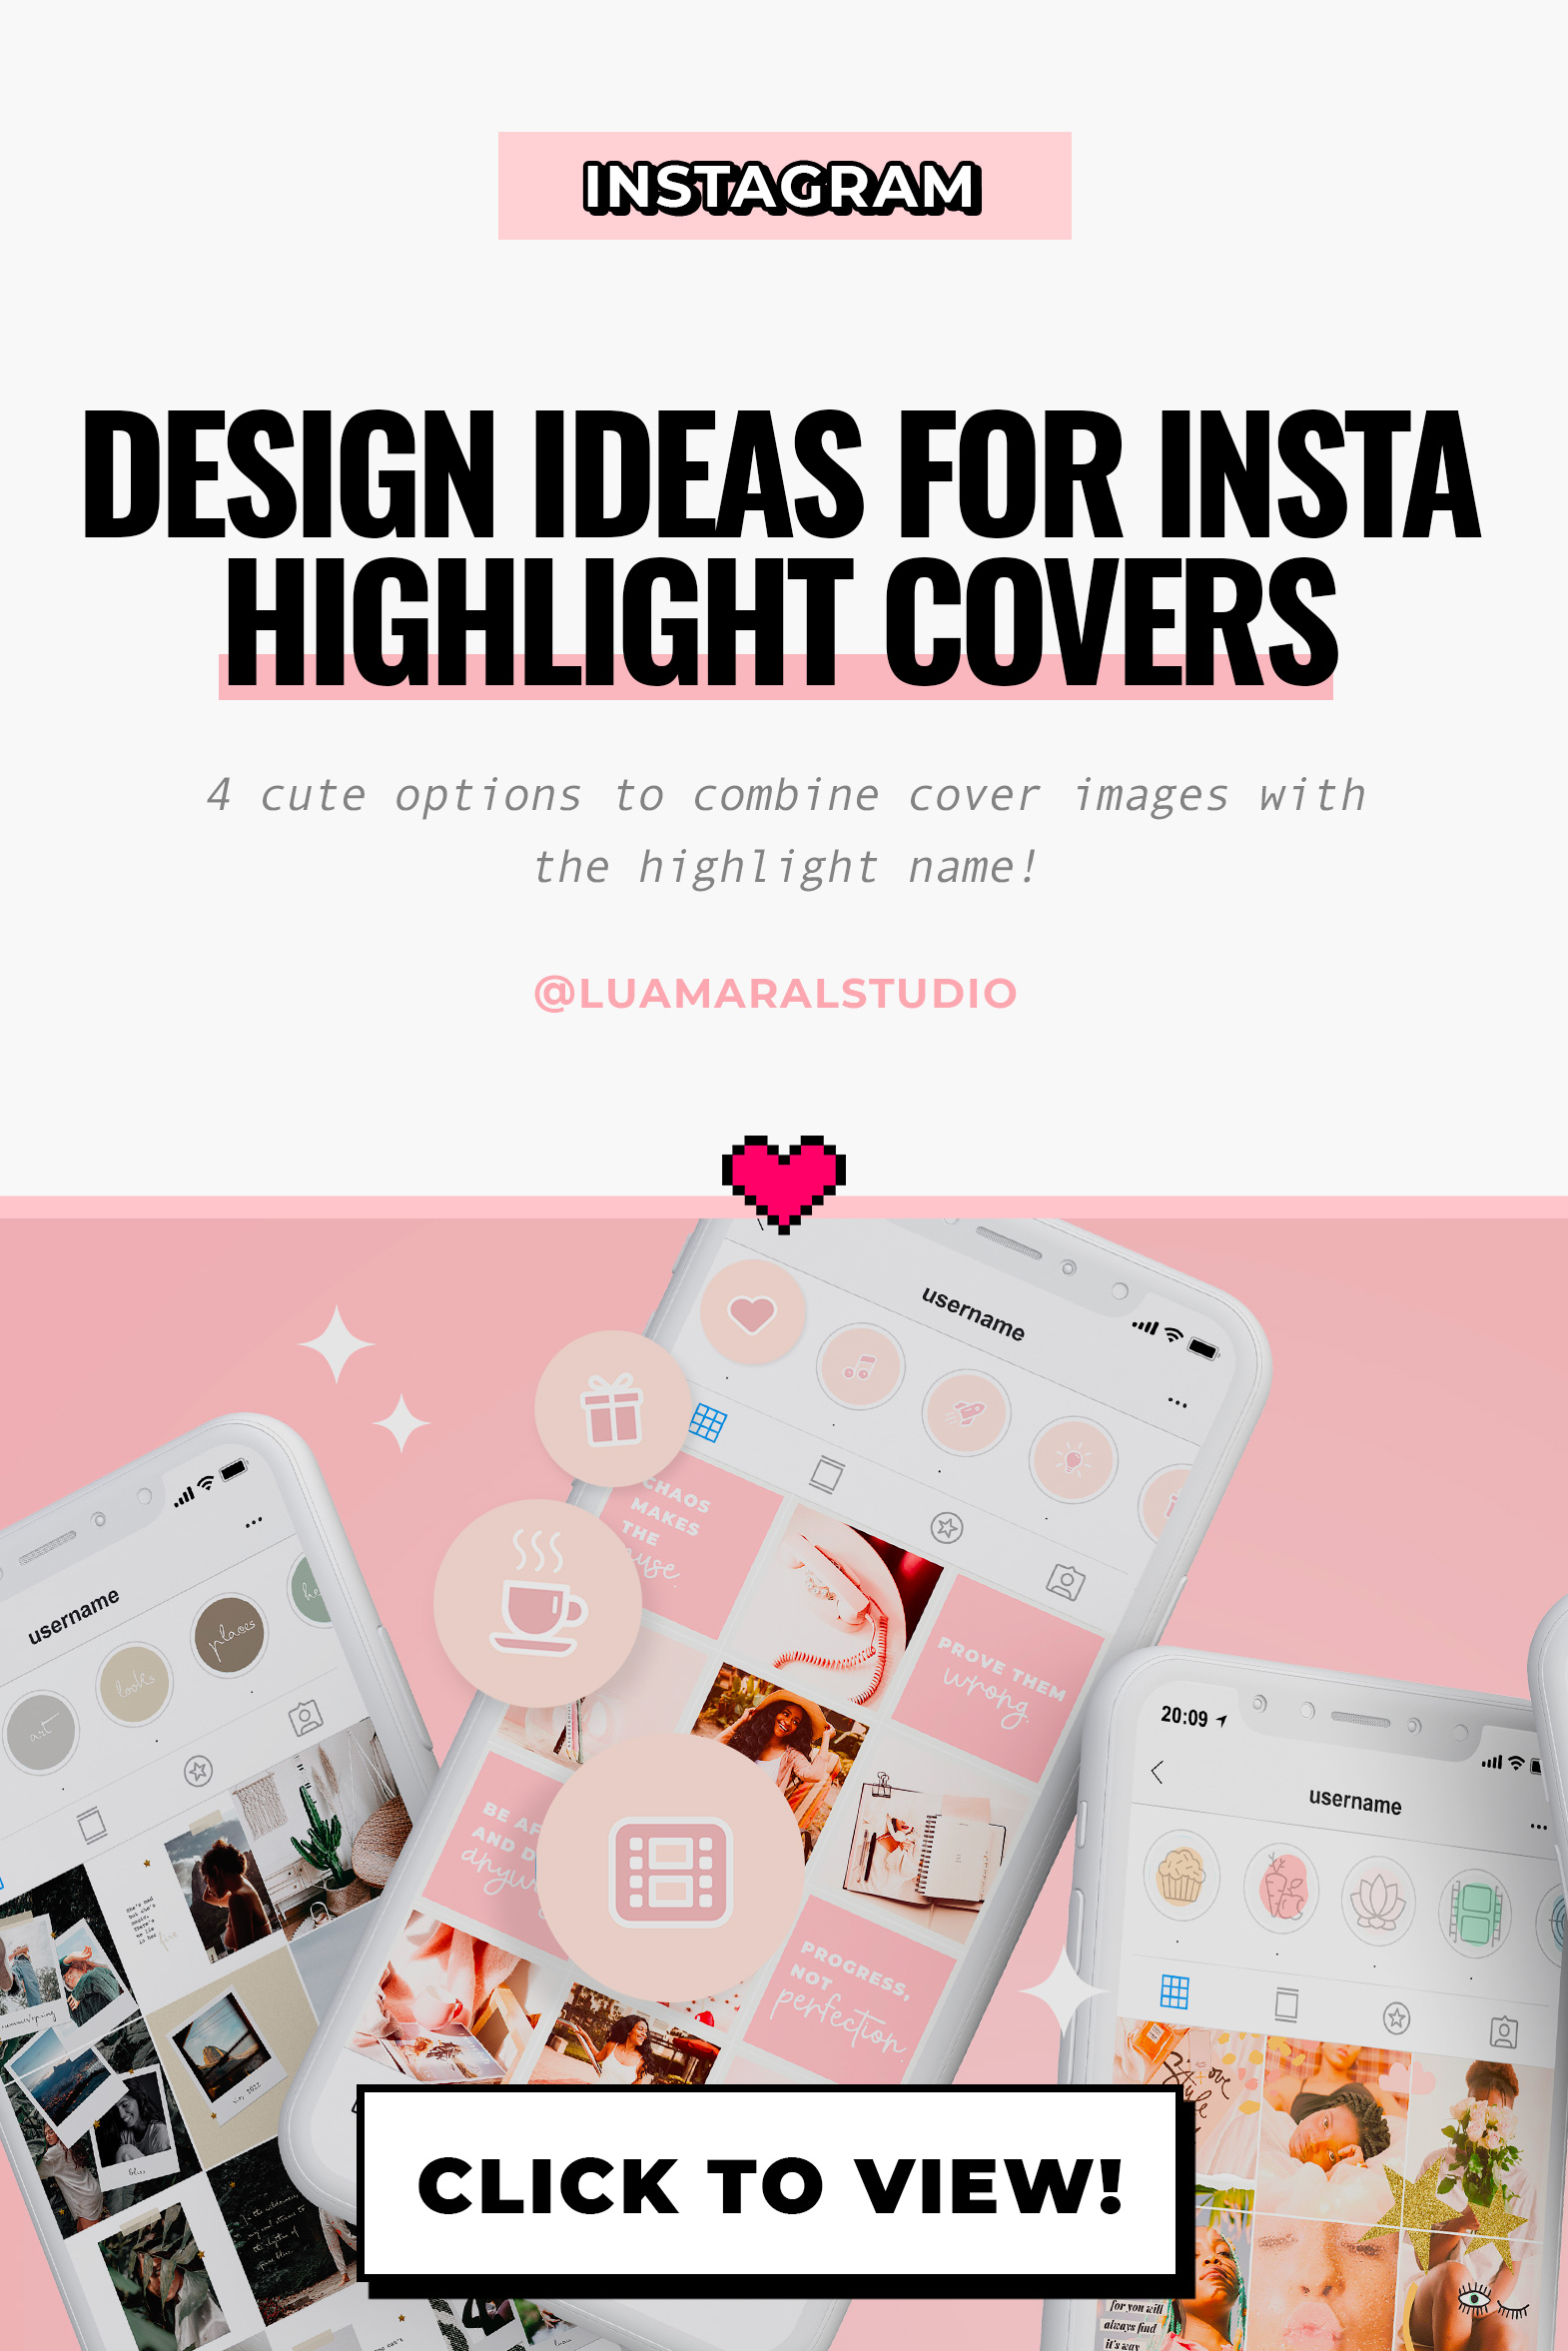 Aesthetic feed: Instagram Highlight covers design ideas ⋆ The Aesthetic ...